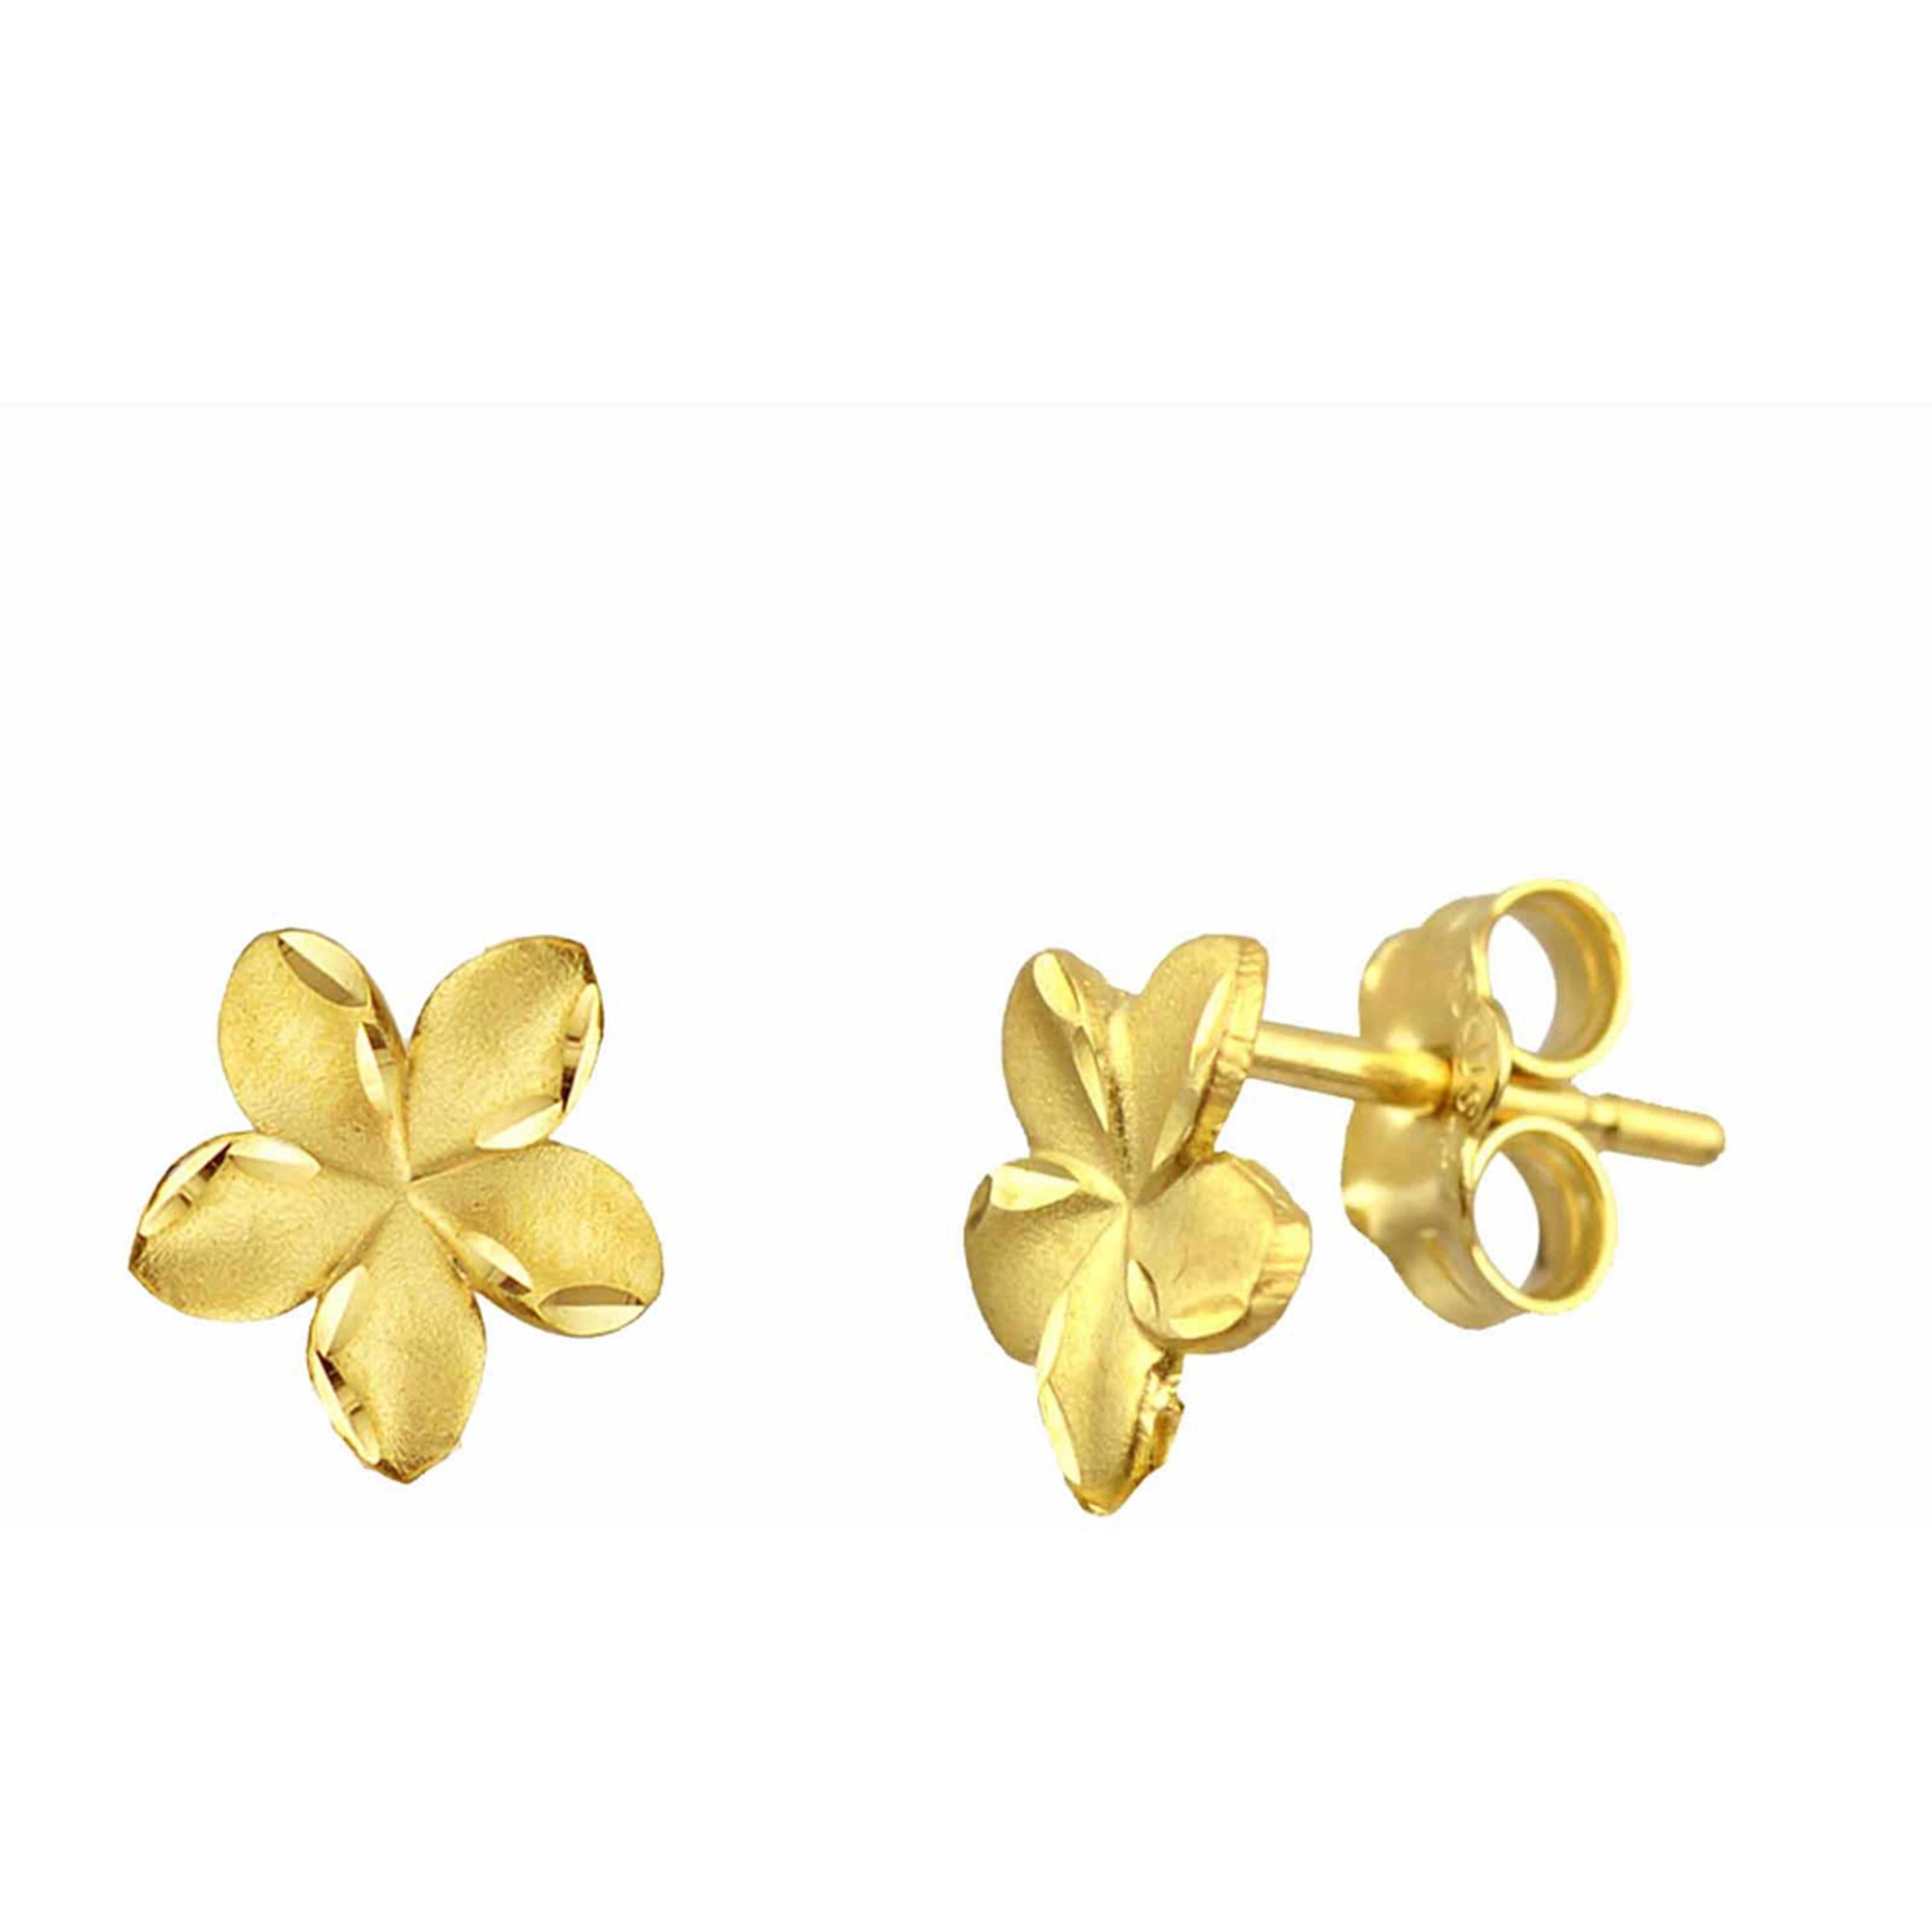 8mm 18kt Two Tone Flower with White Gold Polish and Yellow Gold Satin Scewback Earrings